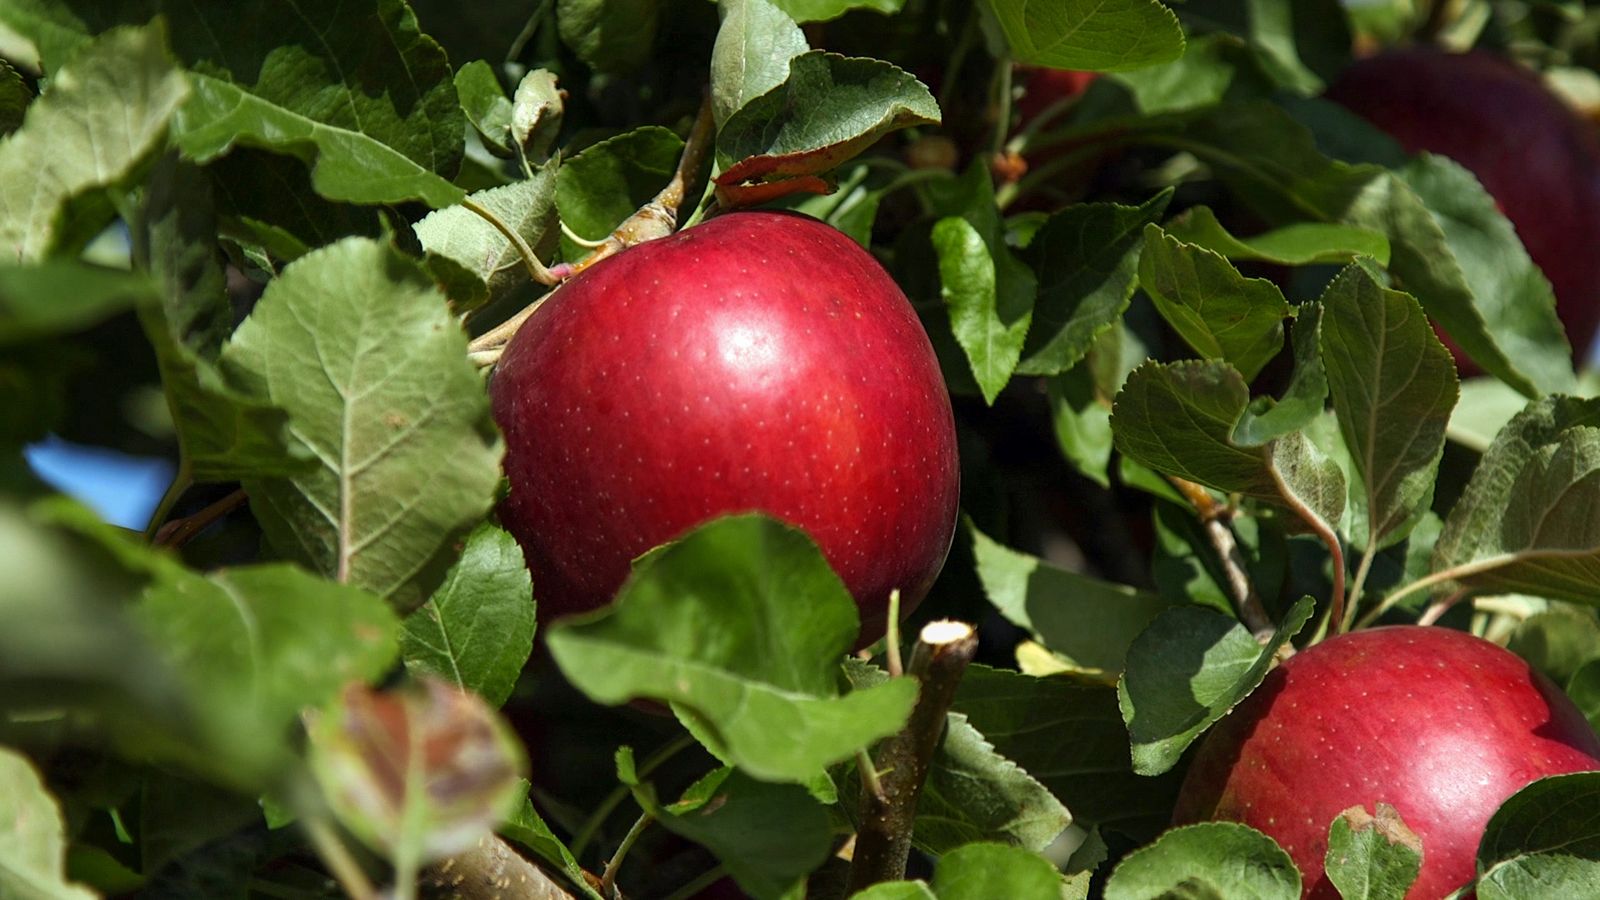 Cosmic Crisp Apples Become Year-Round Variety and Catches Organic Ring with  Stemilt's EZ Band - Perishable News